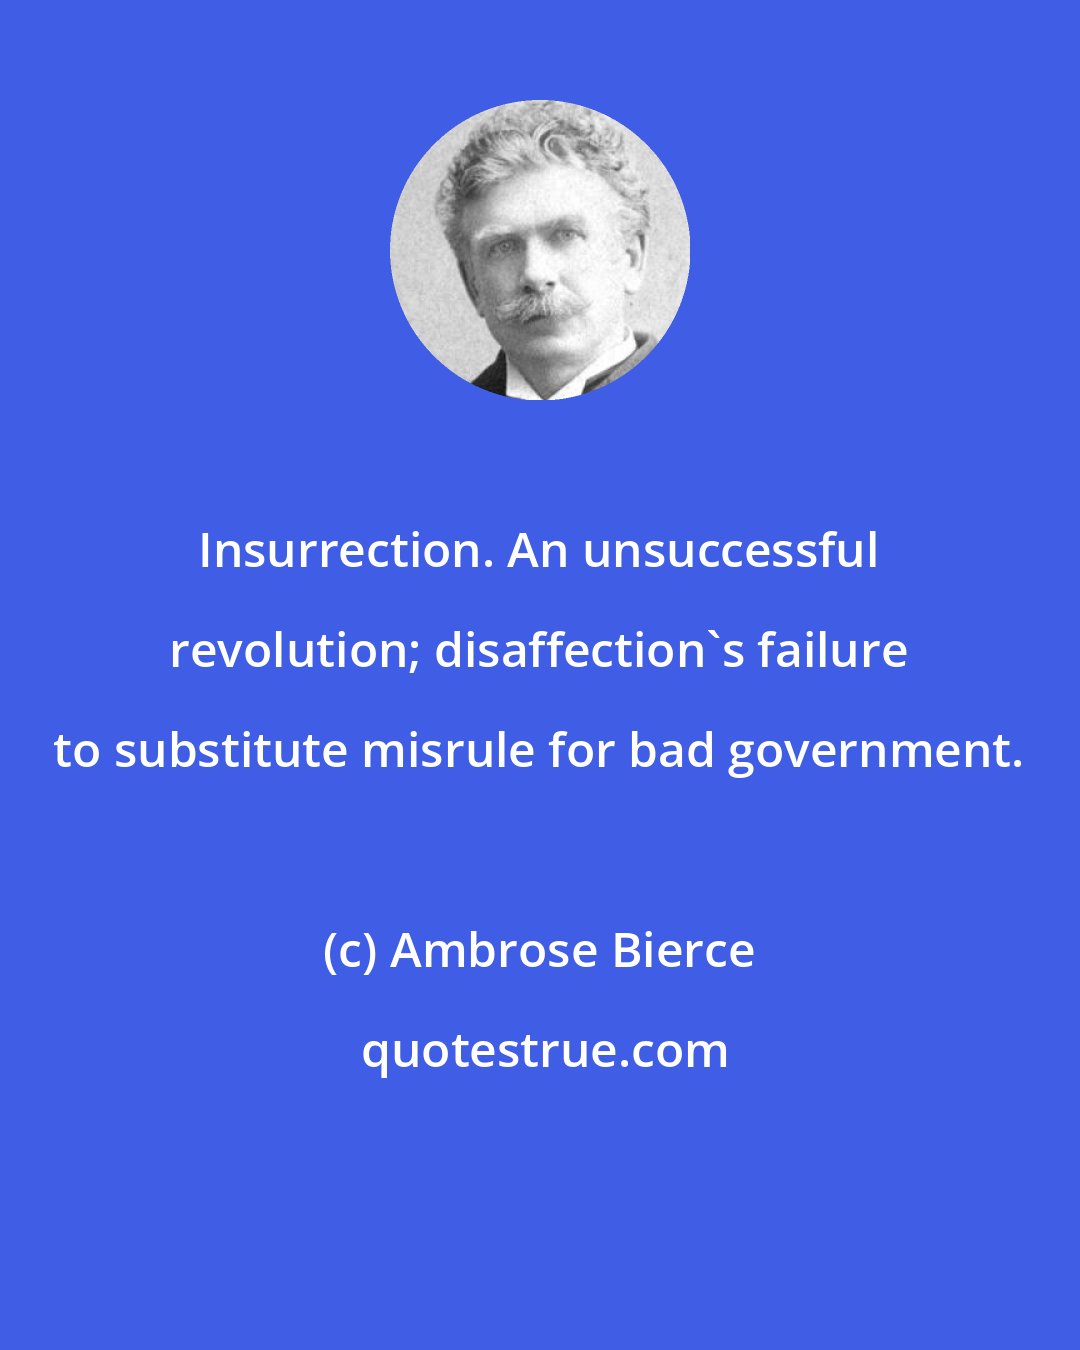 Ambrose Bierce: Insurrection. An unsuccessful revolution; disaffection's failure to substitute misrule for bad government.